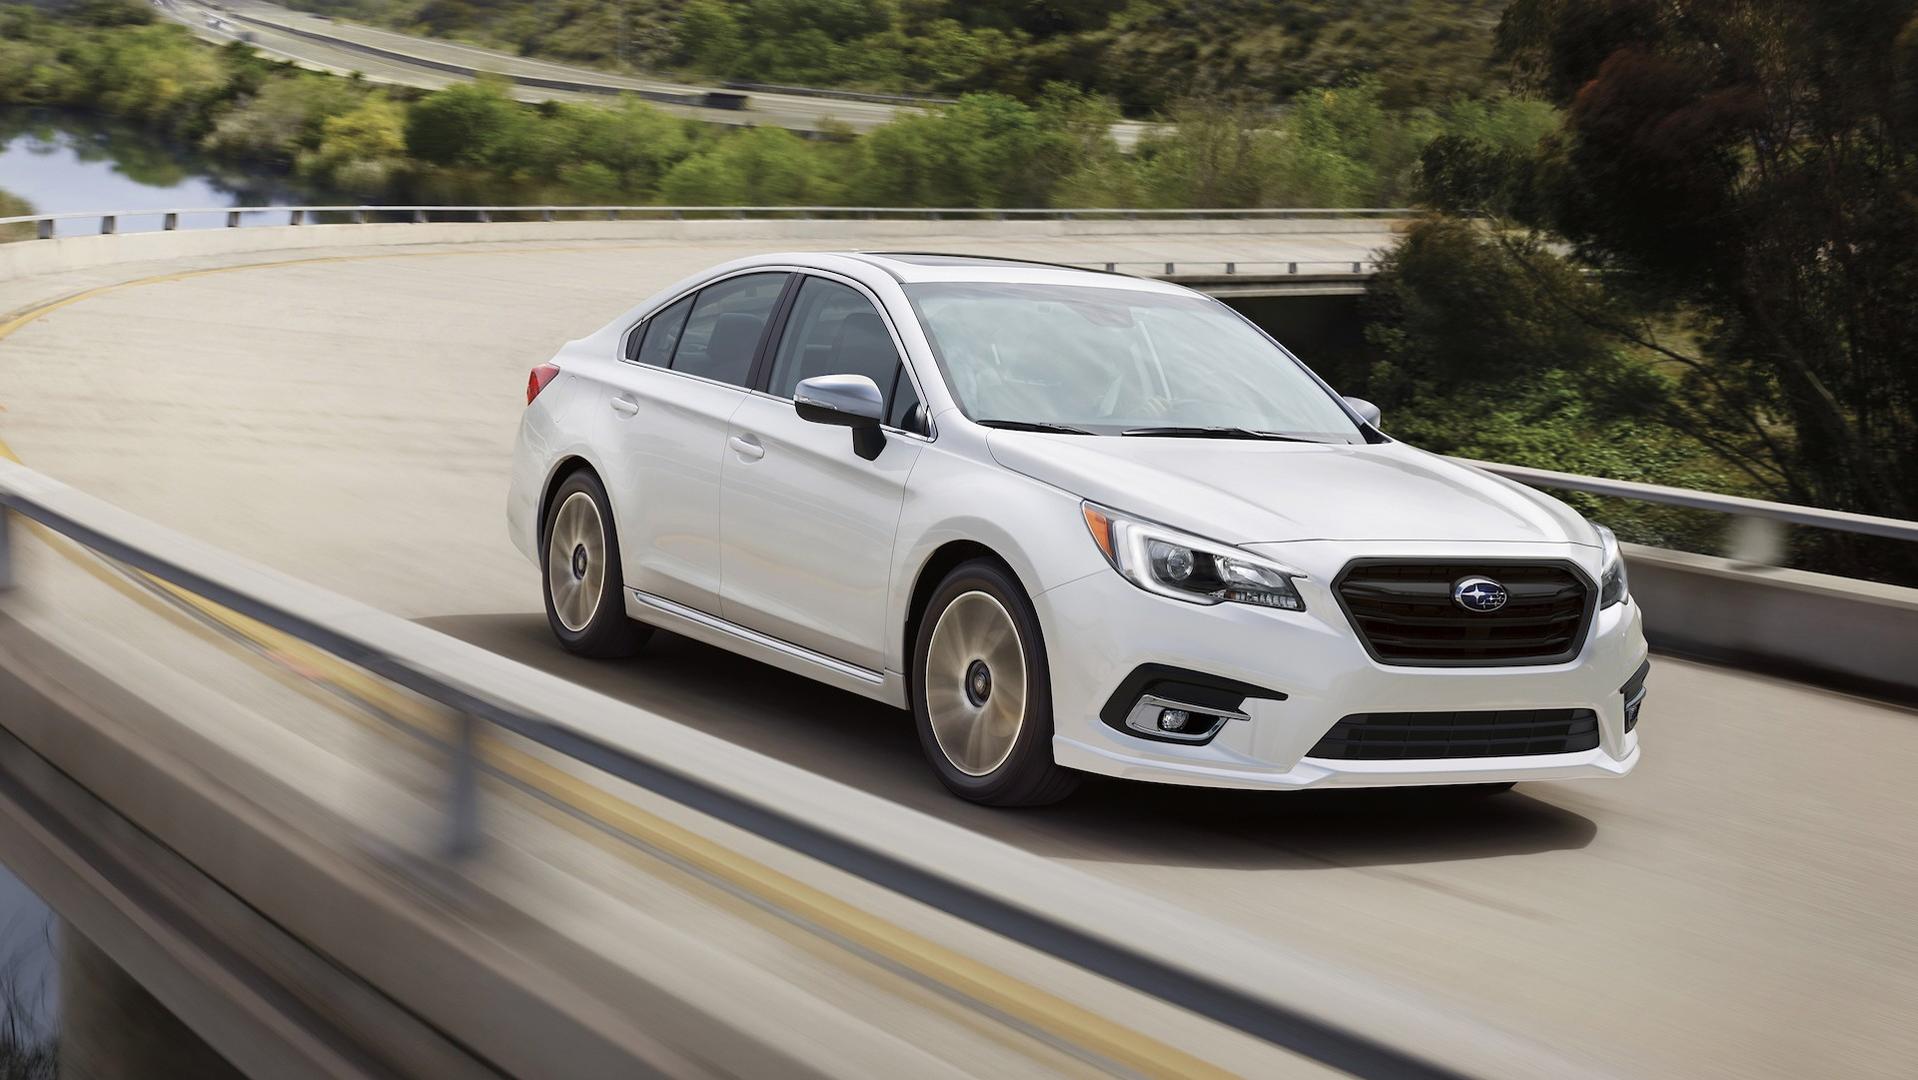 2018 Subaru Legacy Goes On Sale This Summer, Priced From $22,195 -  autoevolution